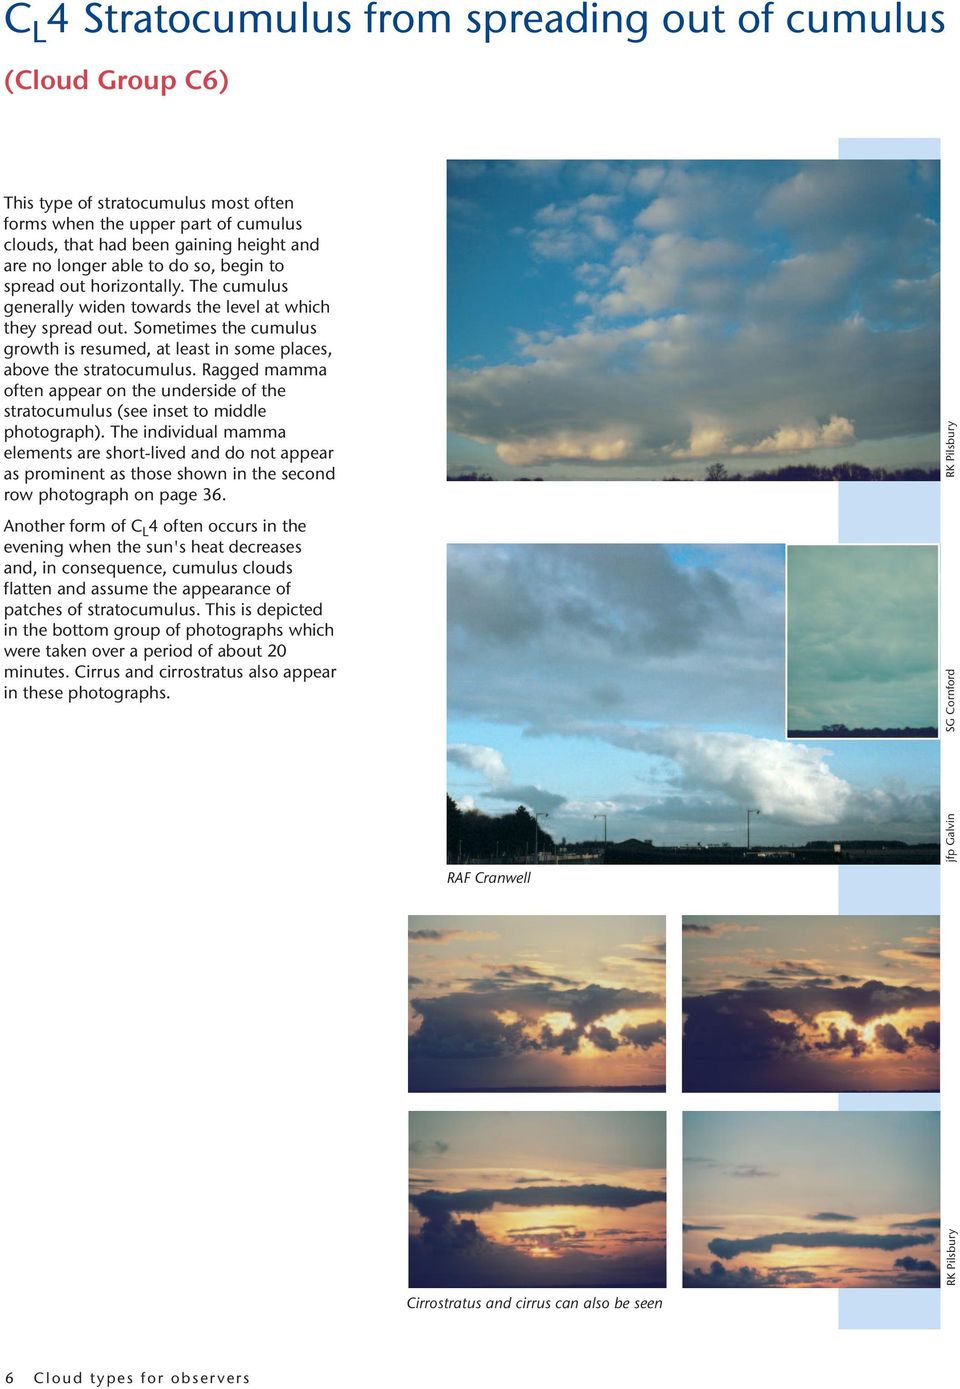 Sometimes the cumulus growth is resumed, at least in some places, above the stratocumulus. Ragged mamma often appear on the underside of the stratocumulus (see inset to middle photograph).